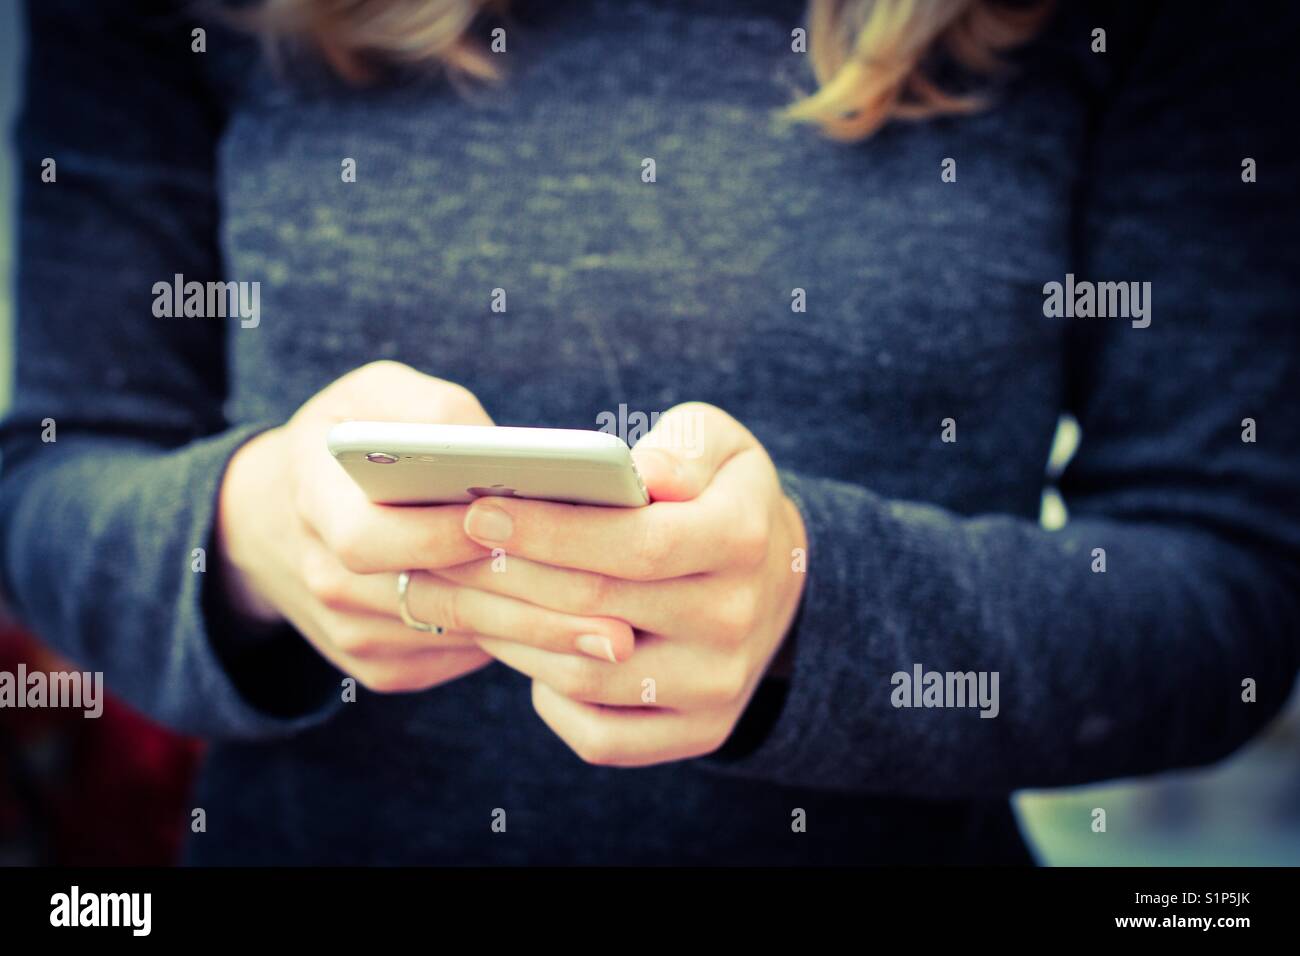 A midsection of a young girl in a dark coloured dress holding a mobile phone in her hands whilst texting a message Stock Photo